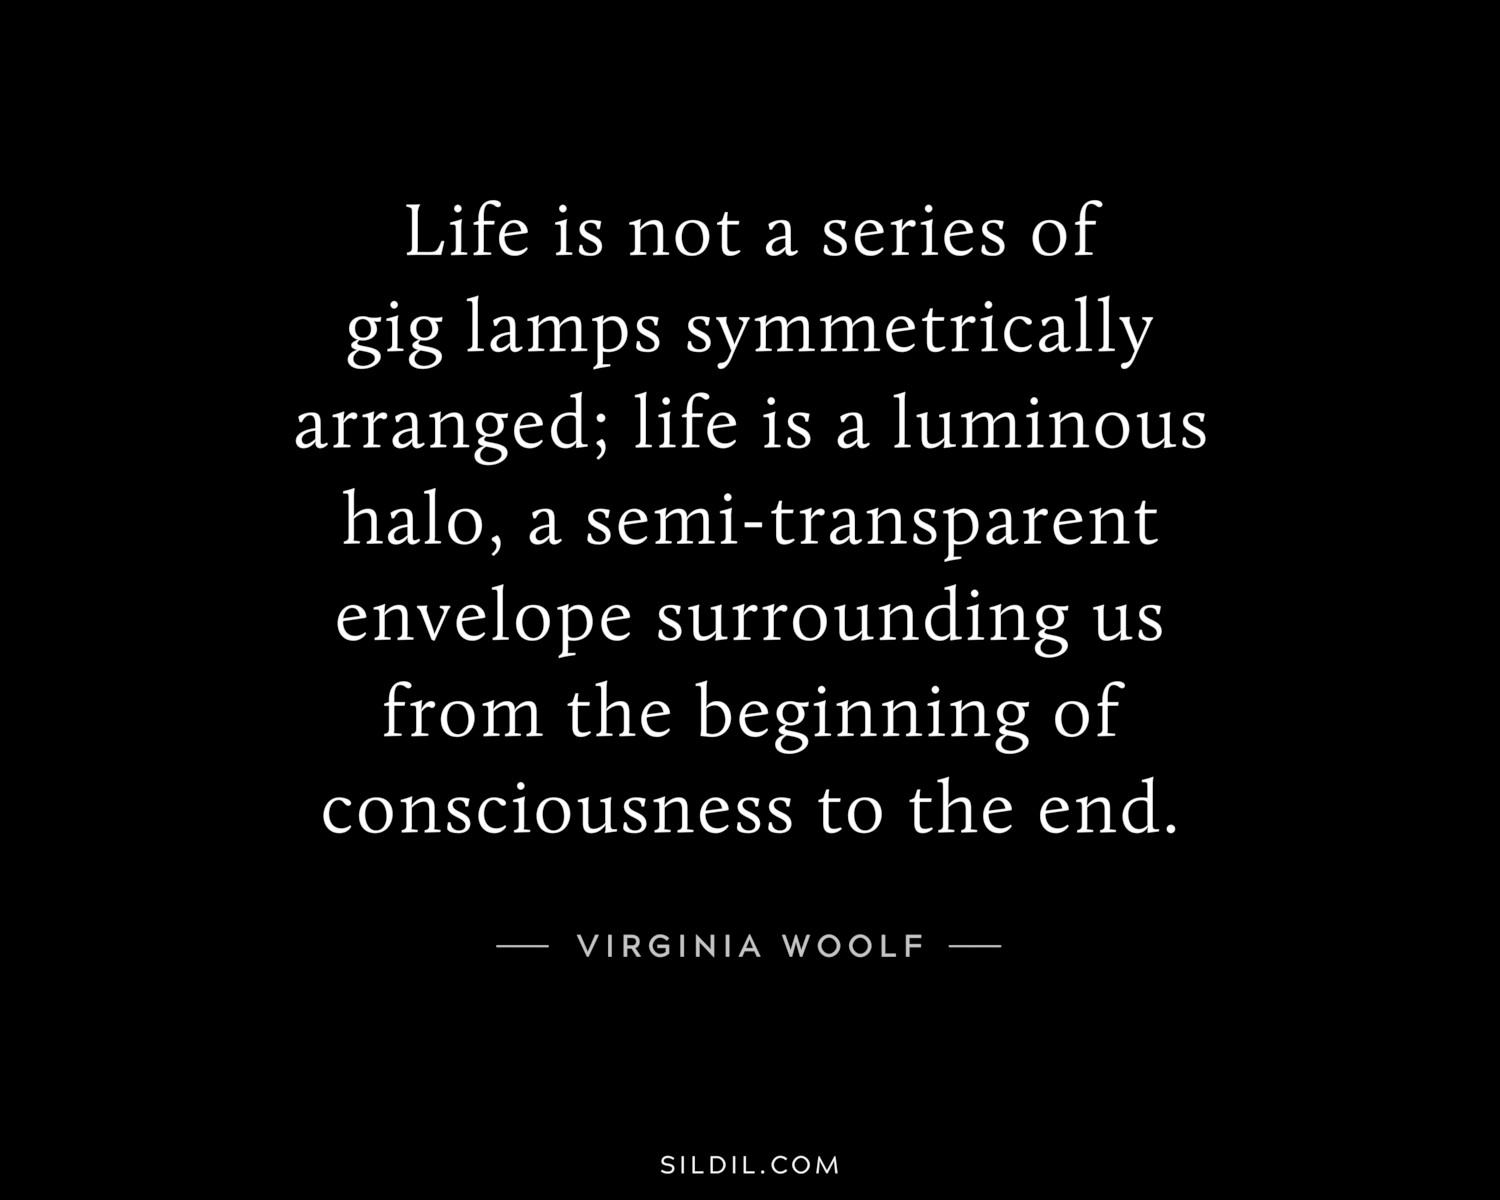 Life is not a series of gig lamps symmetrically arranged; life is a luminous halo, a semi-transparent envelope surrounding us from the beginning of consciousness to the end.